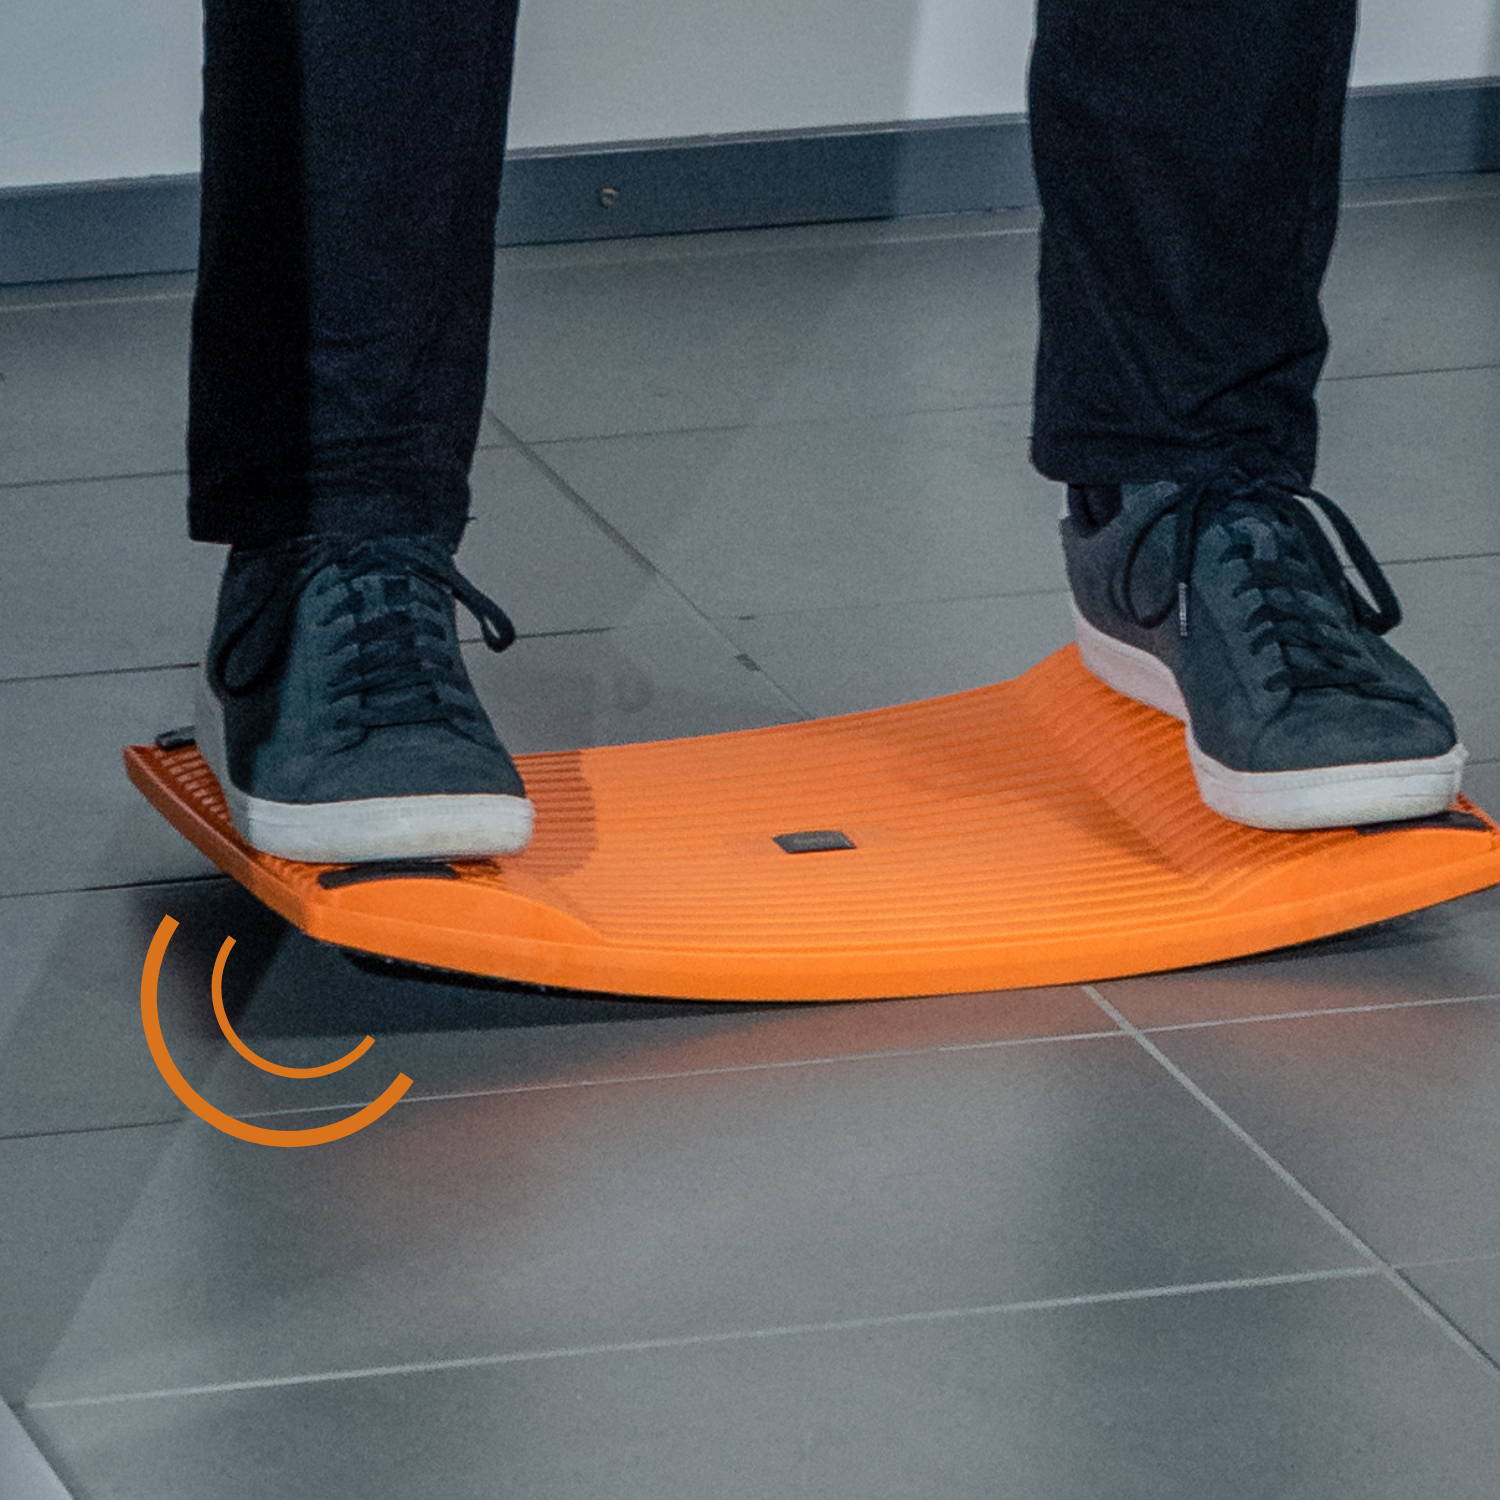 Video showing how to use the Gymba Active Balance Board